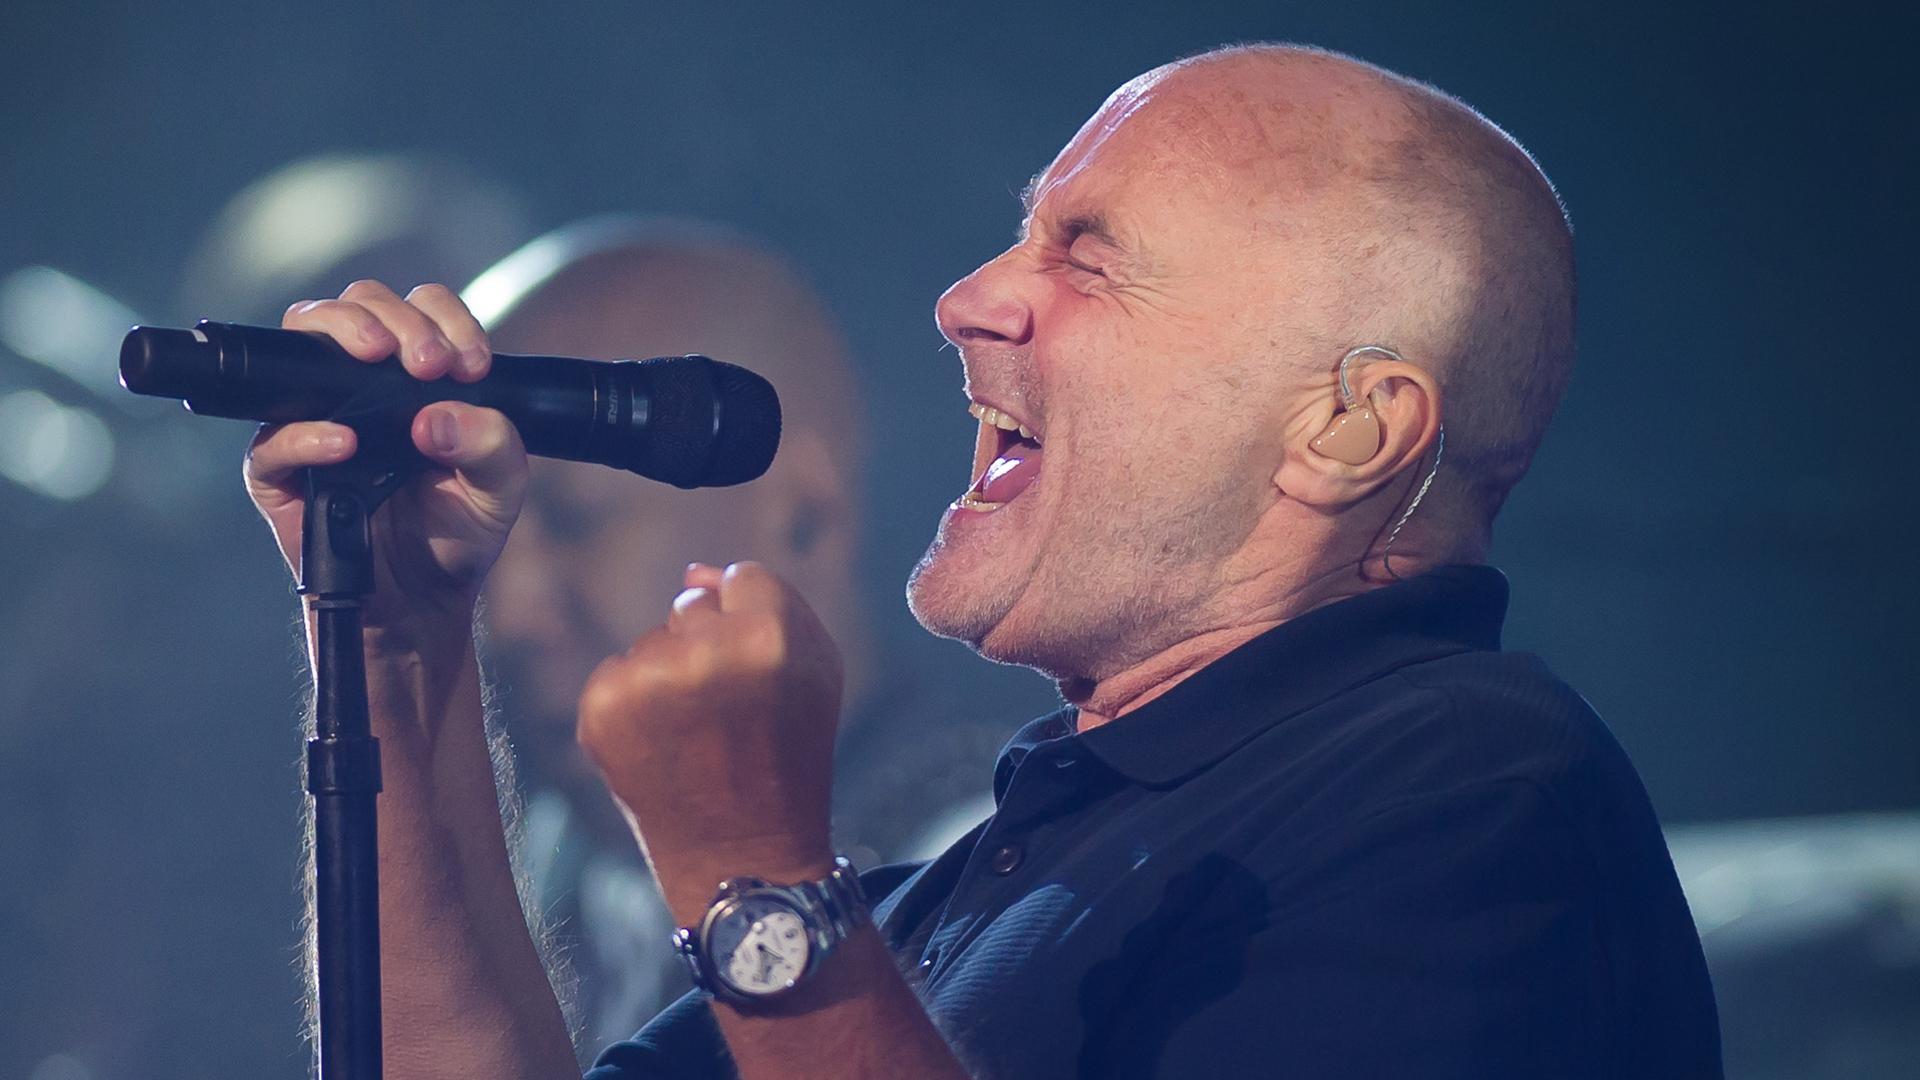 NEW YORK CITY, UNITED STATES - AUGUST 30 : Phil Collins performs at the 2016 US Open Grand Slam tennis tournament opening ceremony.